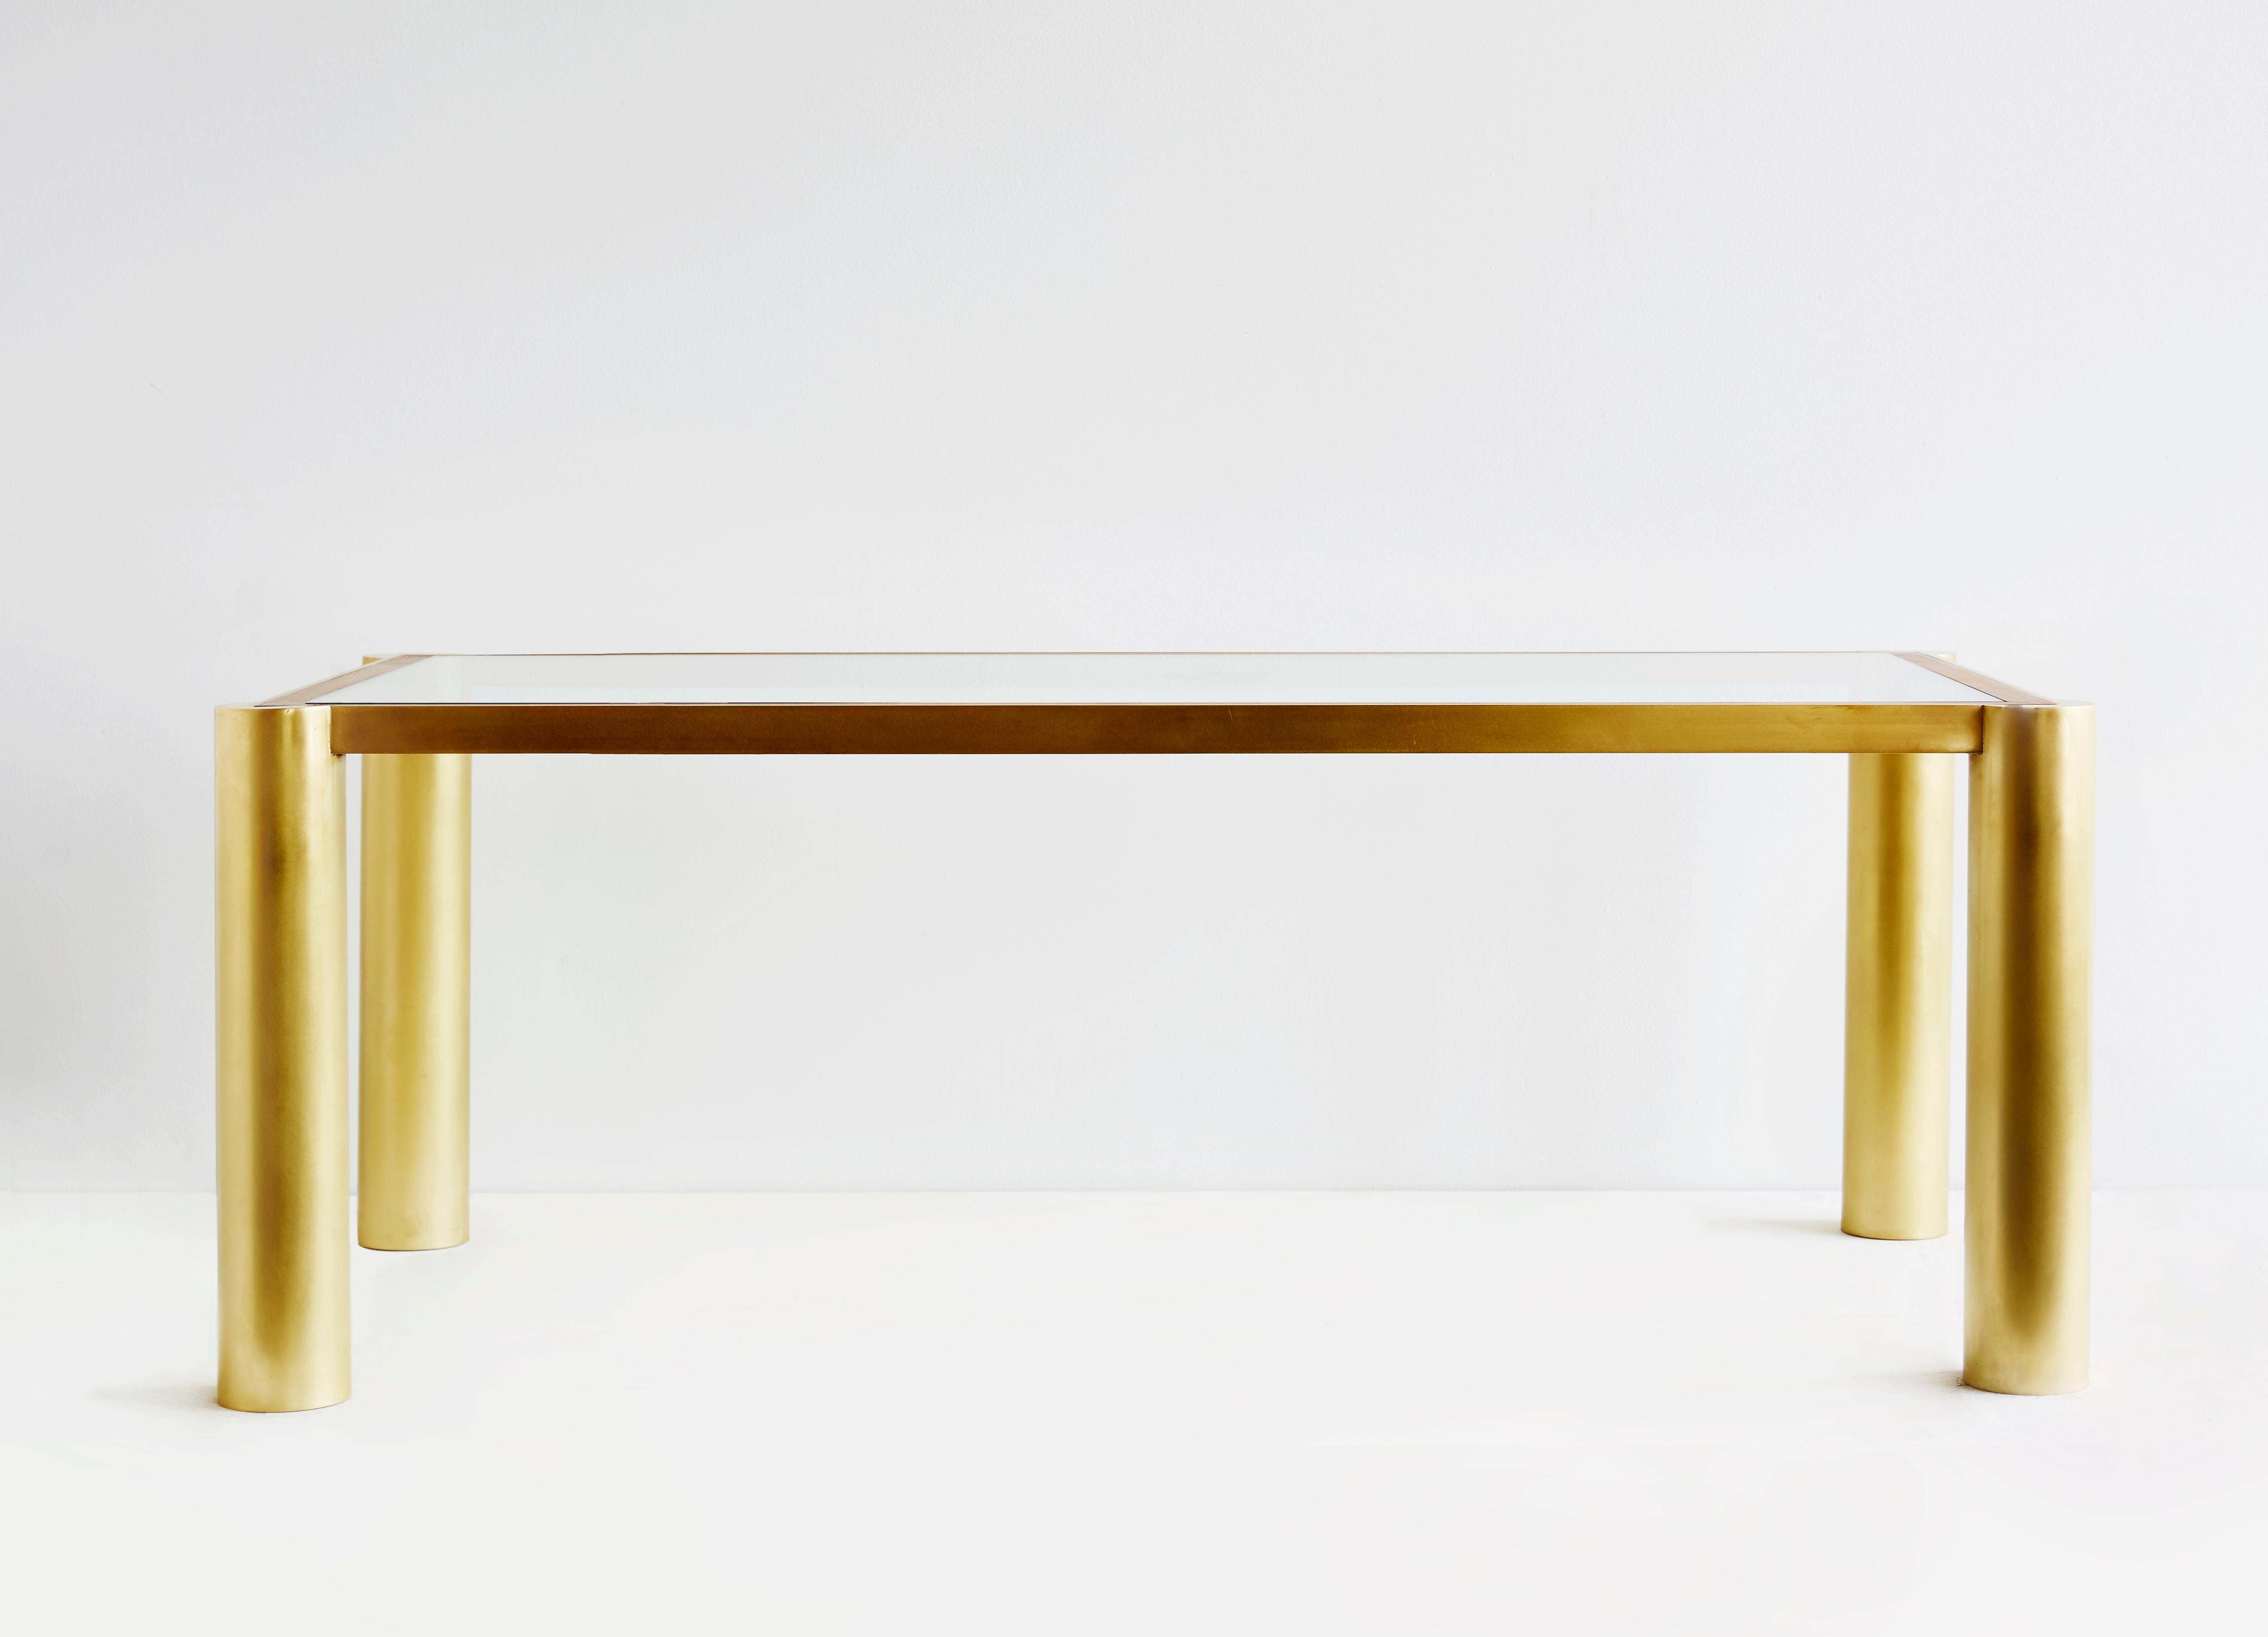 Seline table in walnut and brass by Cam Crockford

Additional information:
Materials: Walnut, brass
Dimensions: 48 W x 24 D x 15 H inches.